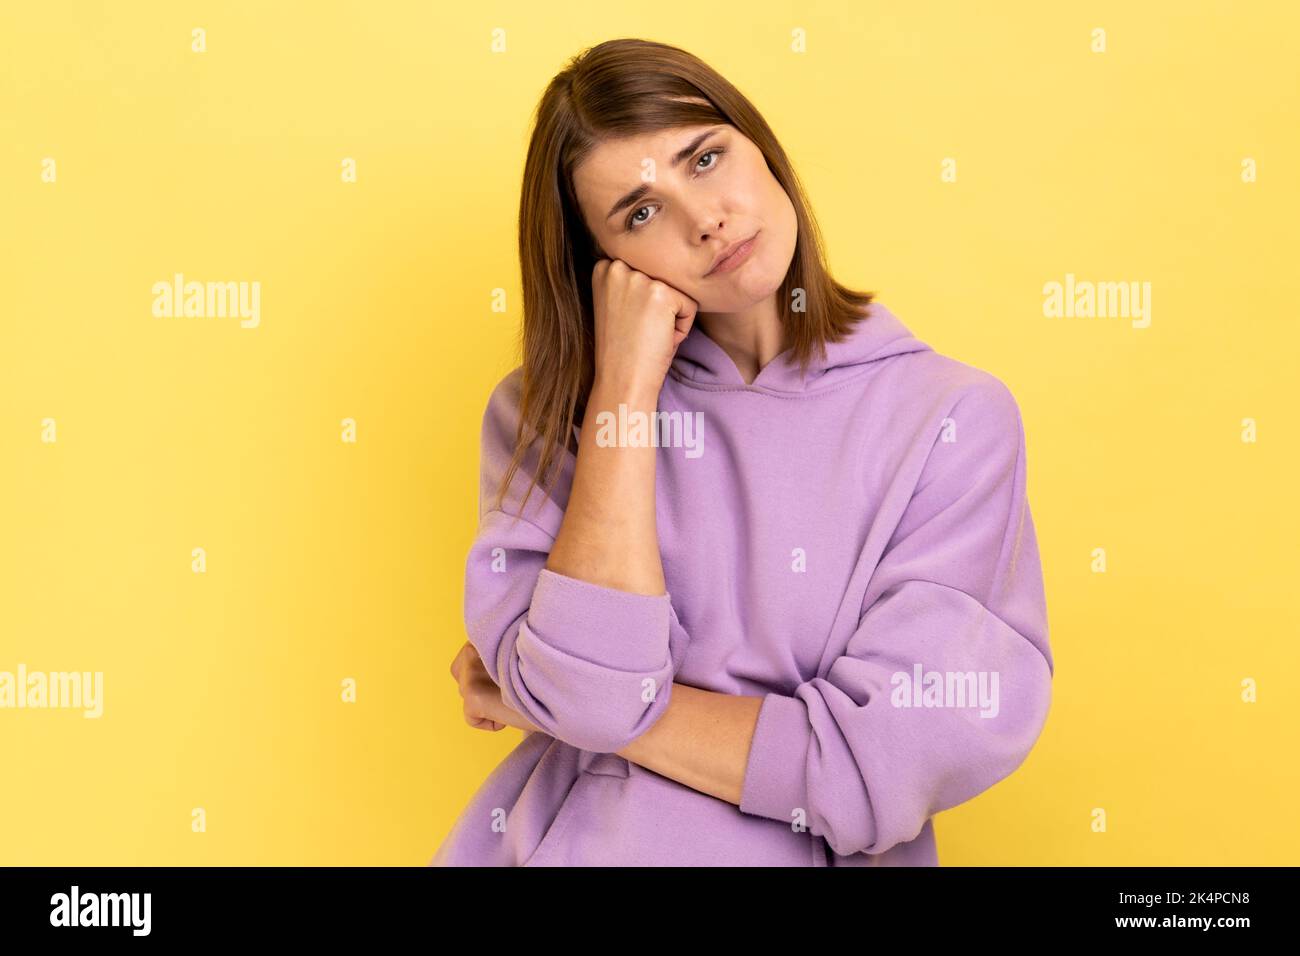 Portrait of bored exhausted woman leaning on hand and looking at camera with disinterest, tired of boring sad story, wearing purple hoodie. Indoor studio shot isolated on yellow background. Stock Photo